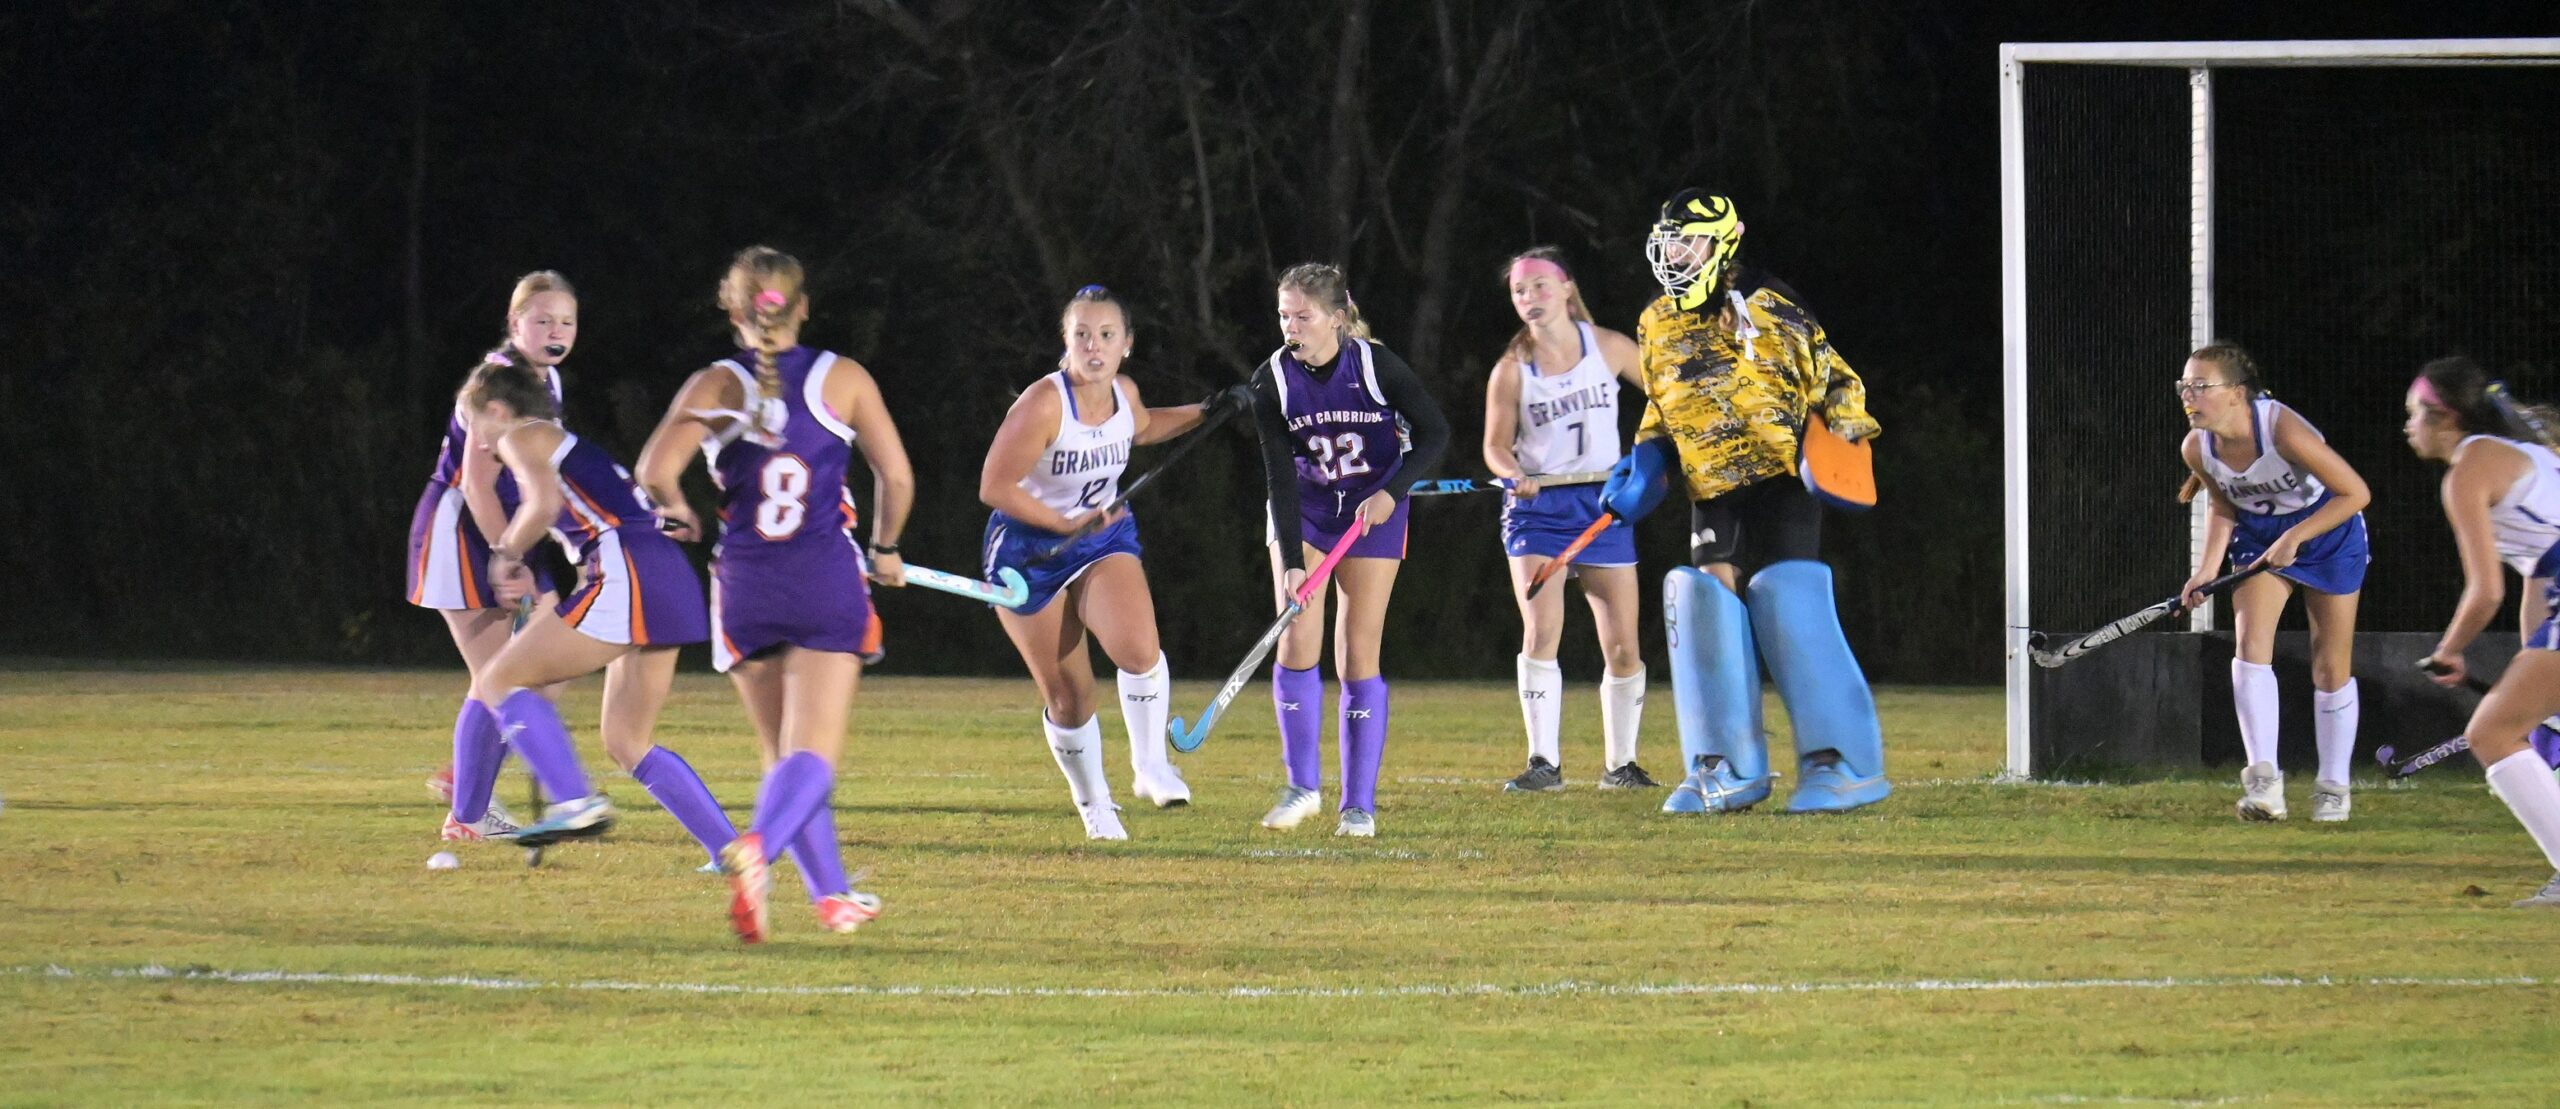 Read more about the article Horde Seeded No. 3 in Field Hockey Sectionals